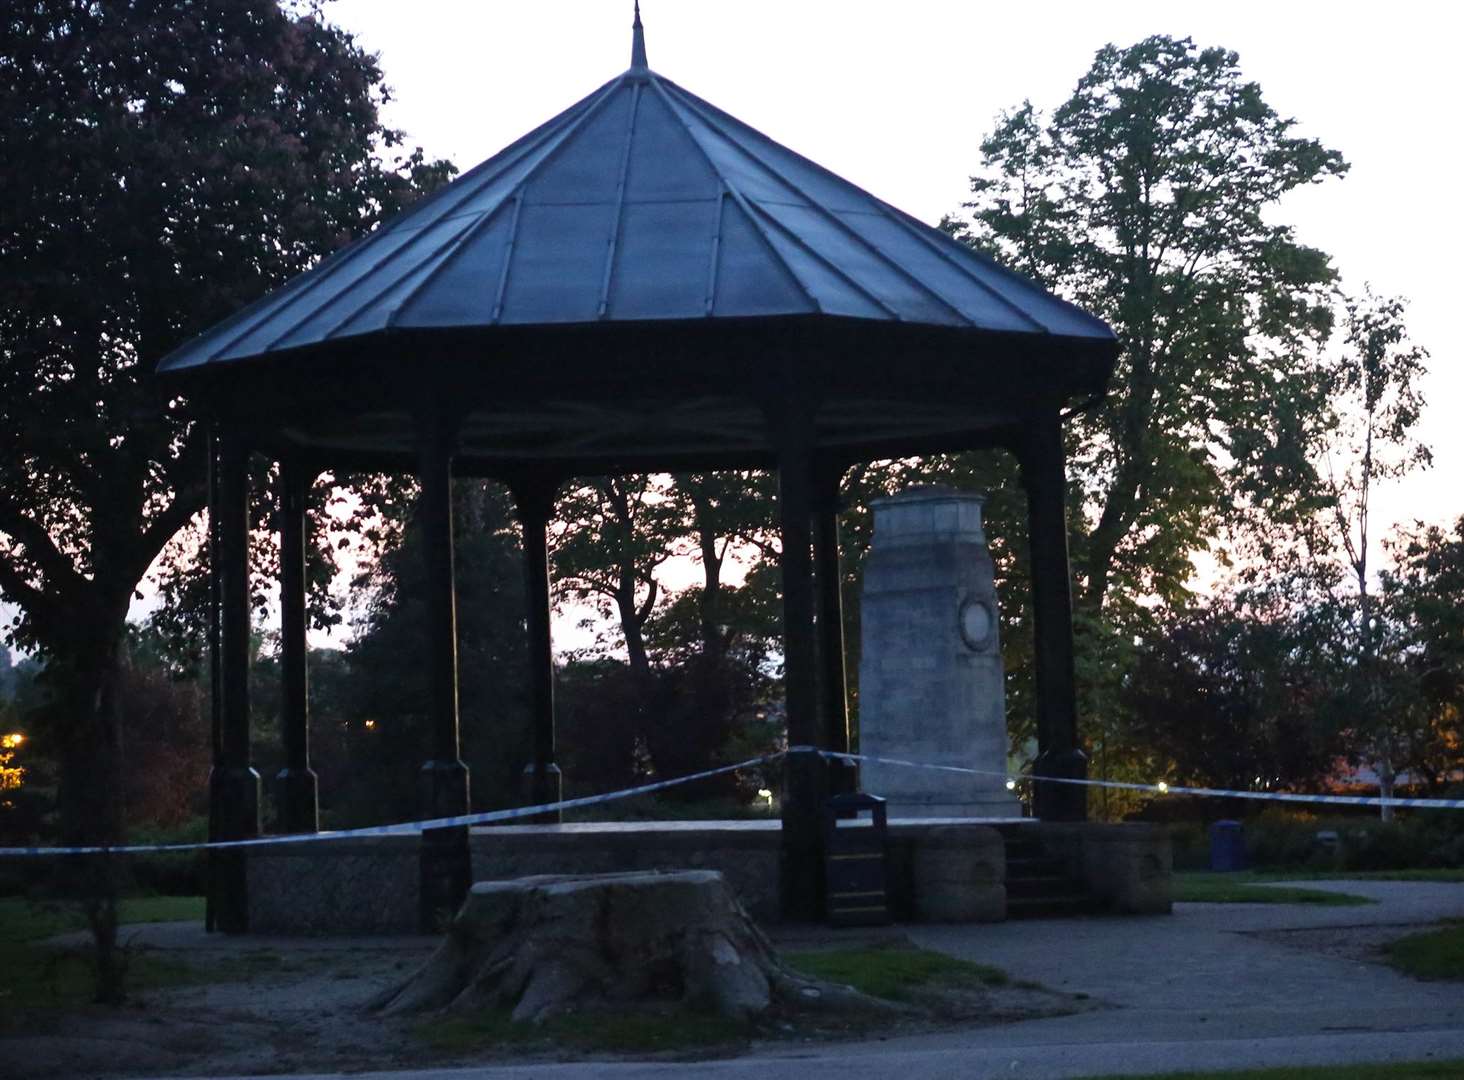 The park's bandstand was sealed off